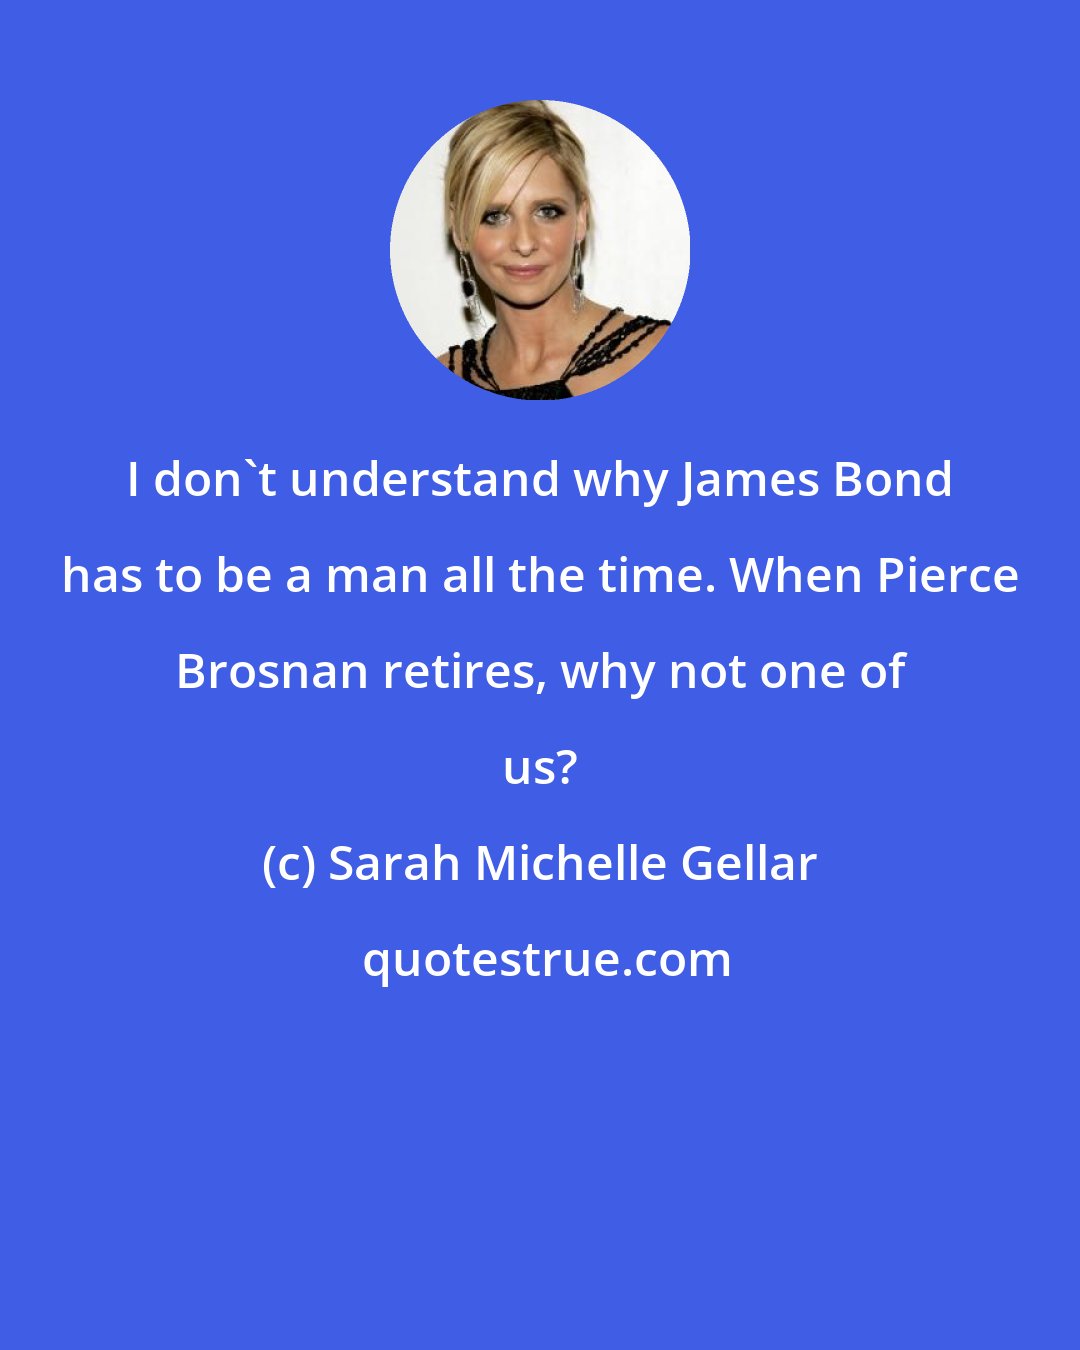 Sarah Michelle Gellar: I don't understand why James Bond has to be a man all the time. When Pierce Brosnan retires, why not one of us?